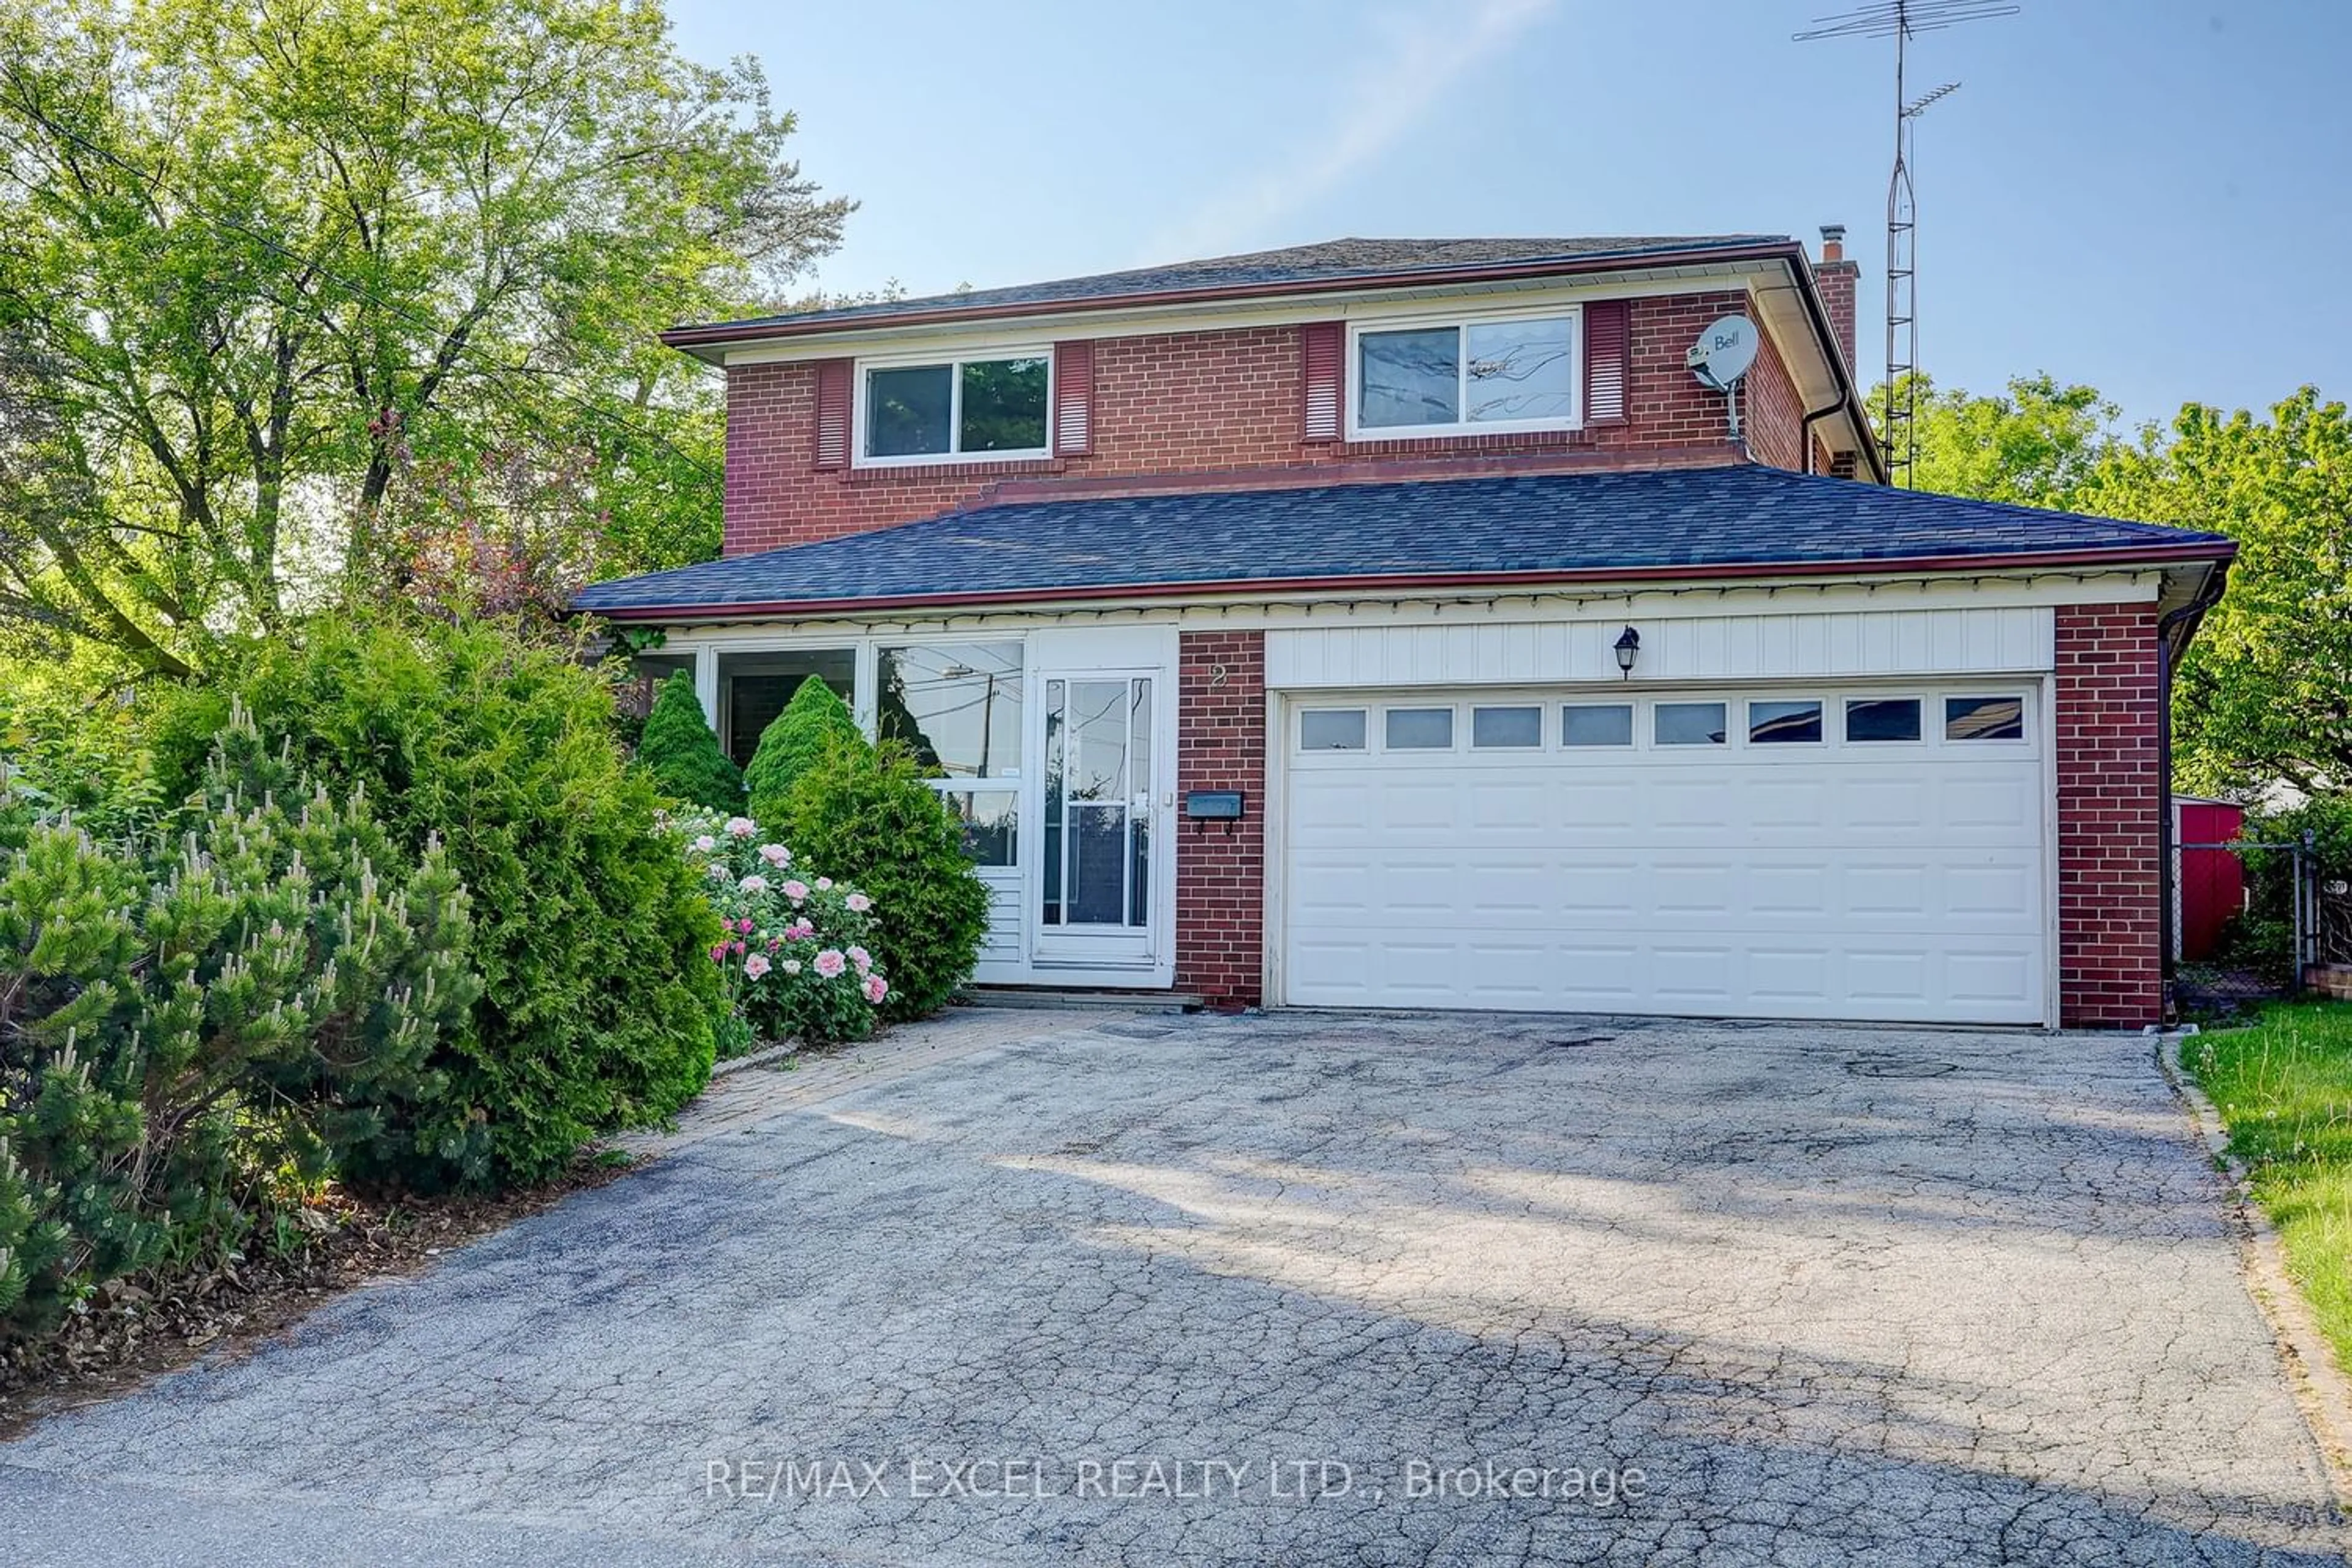 Home with brick exterior material for 2 Pitfield Rd, Toronto Ontario M1S 1X7